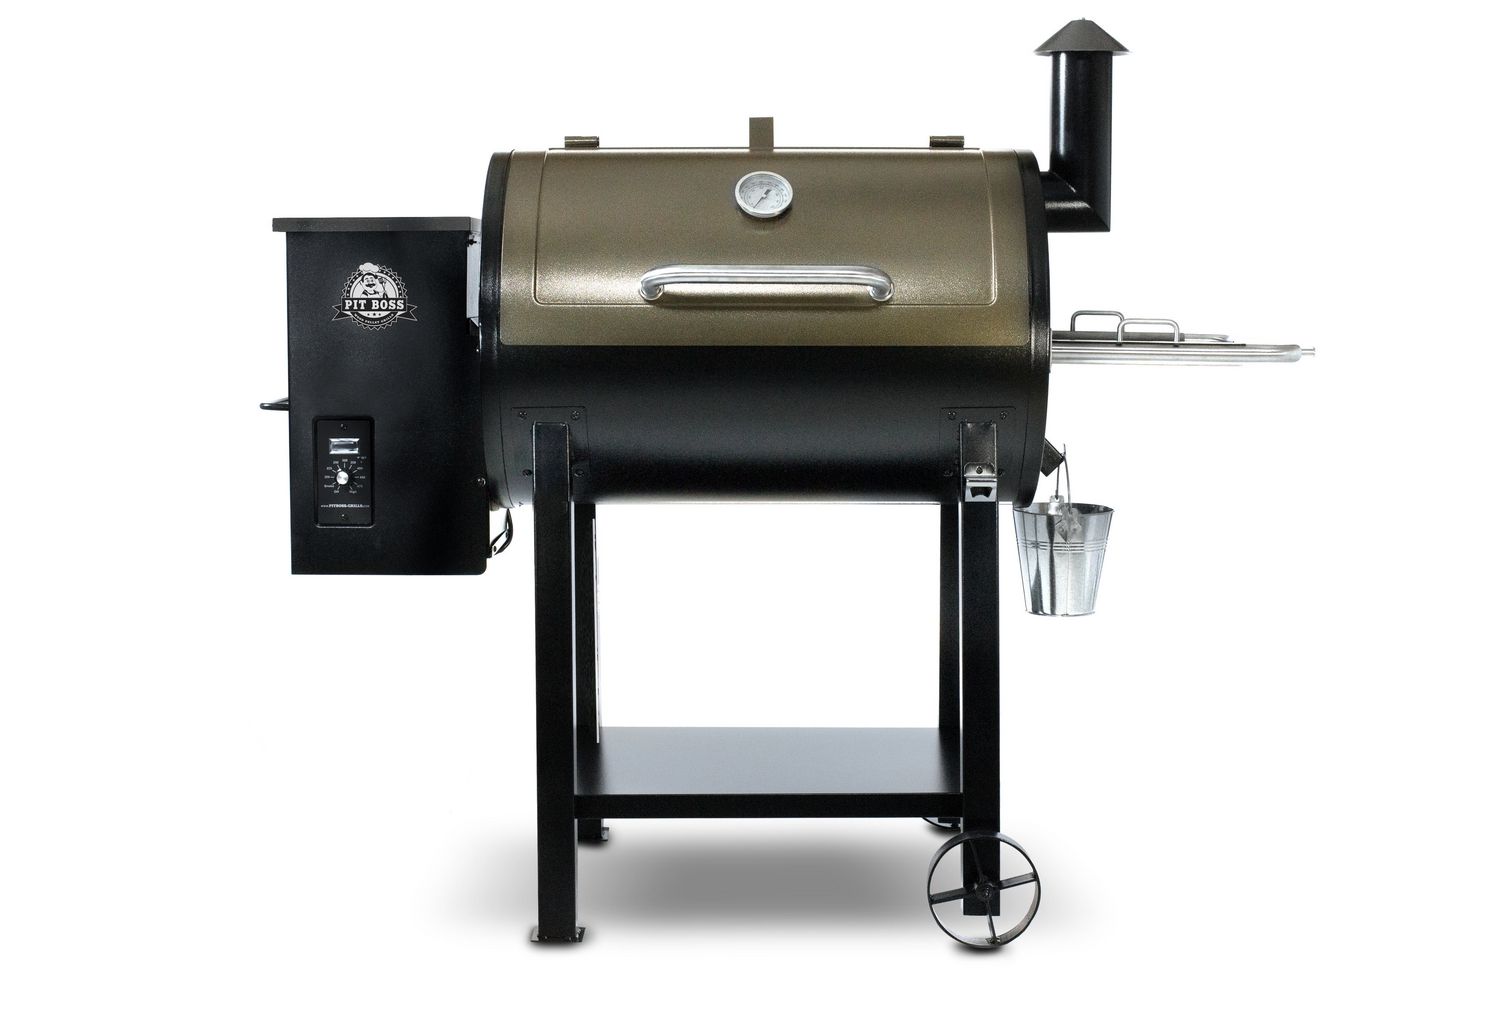 pit boss pellet grill at academy